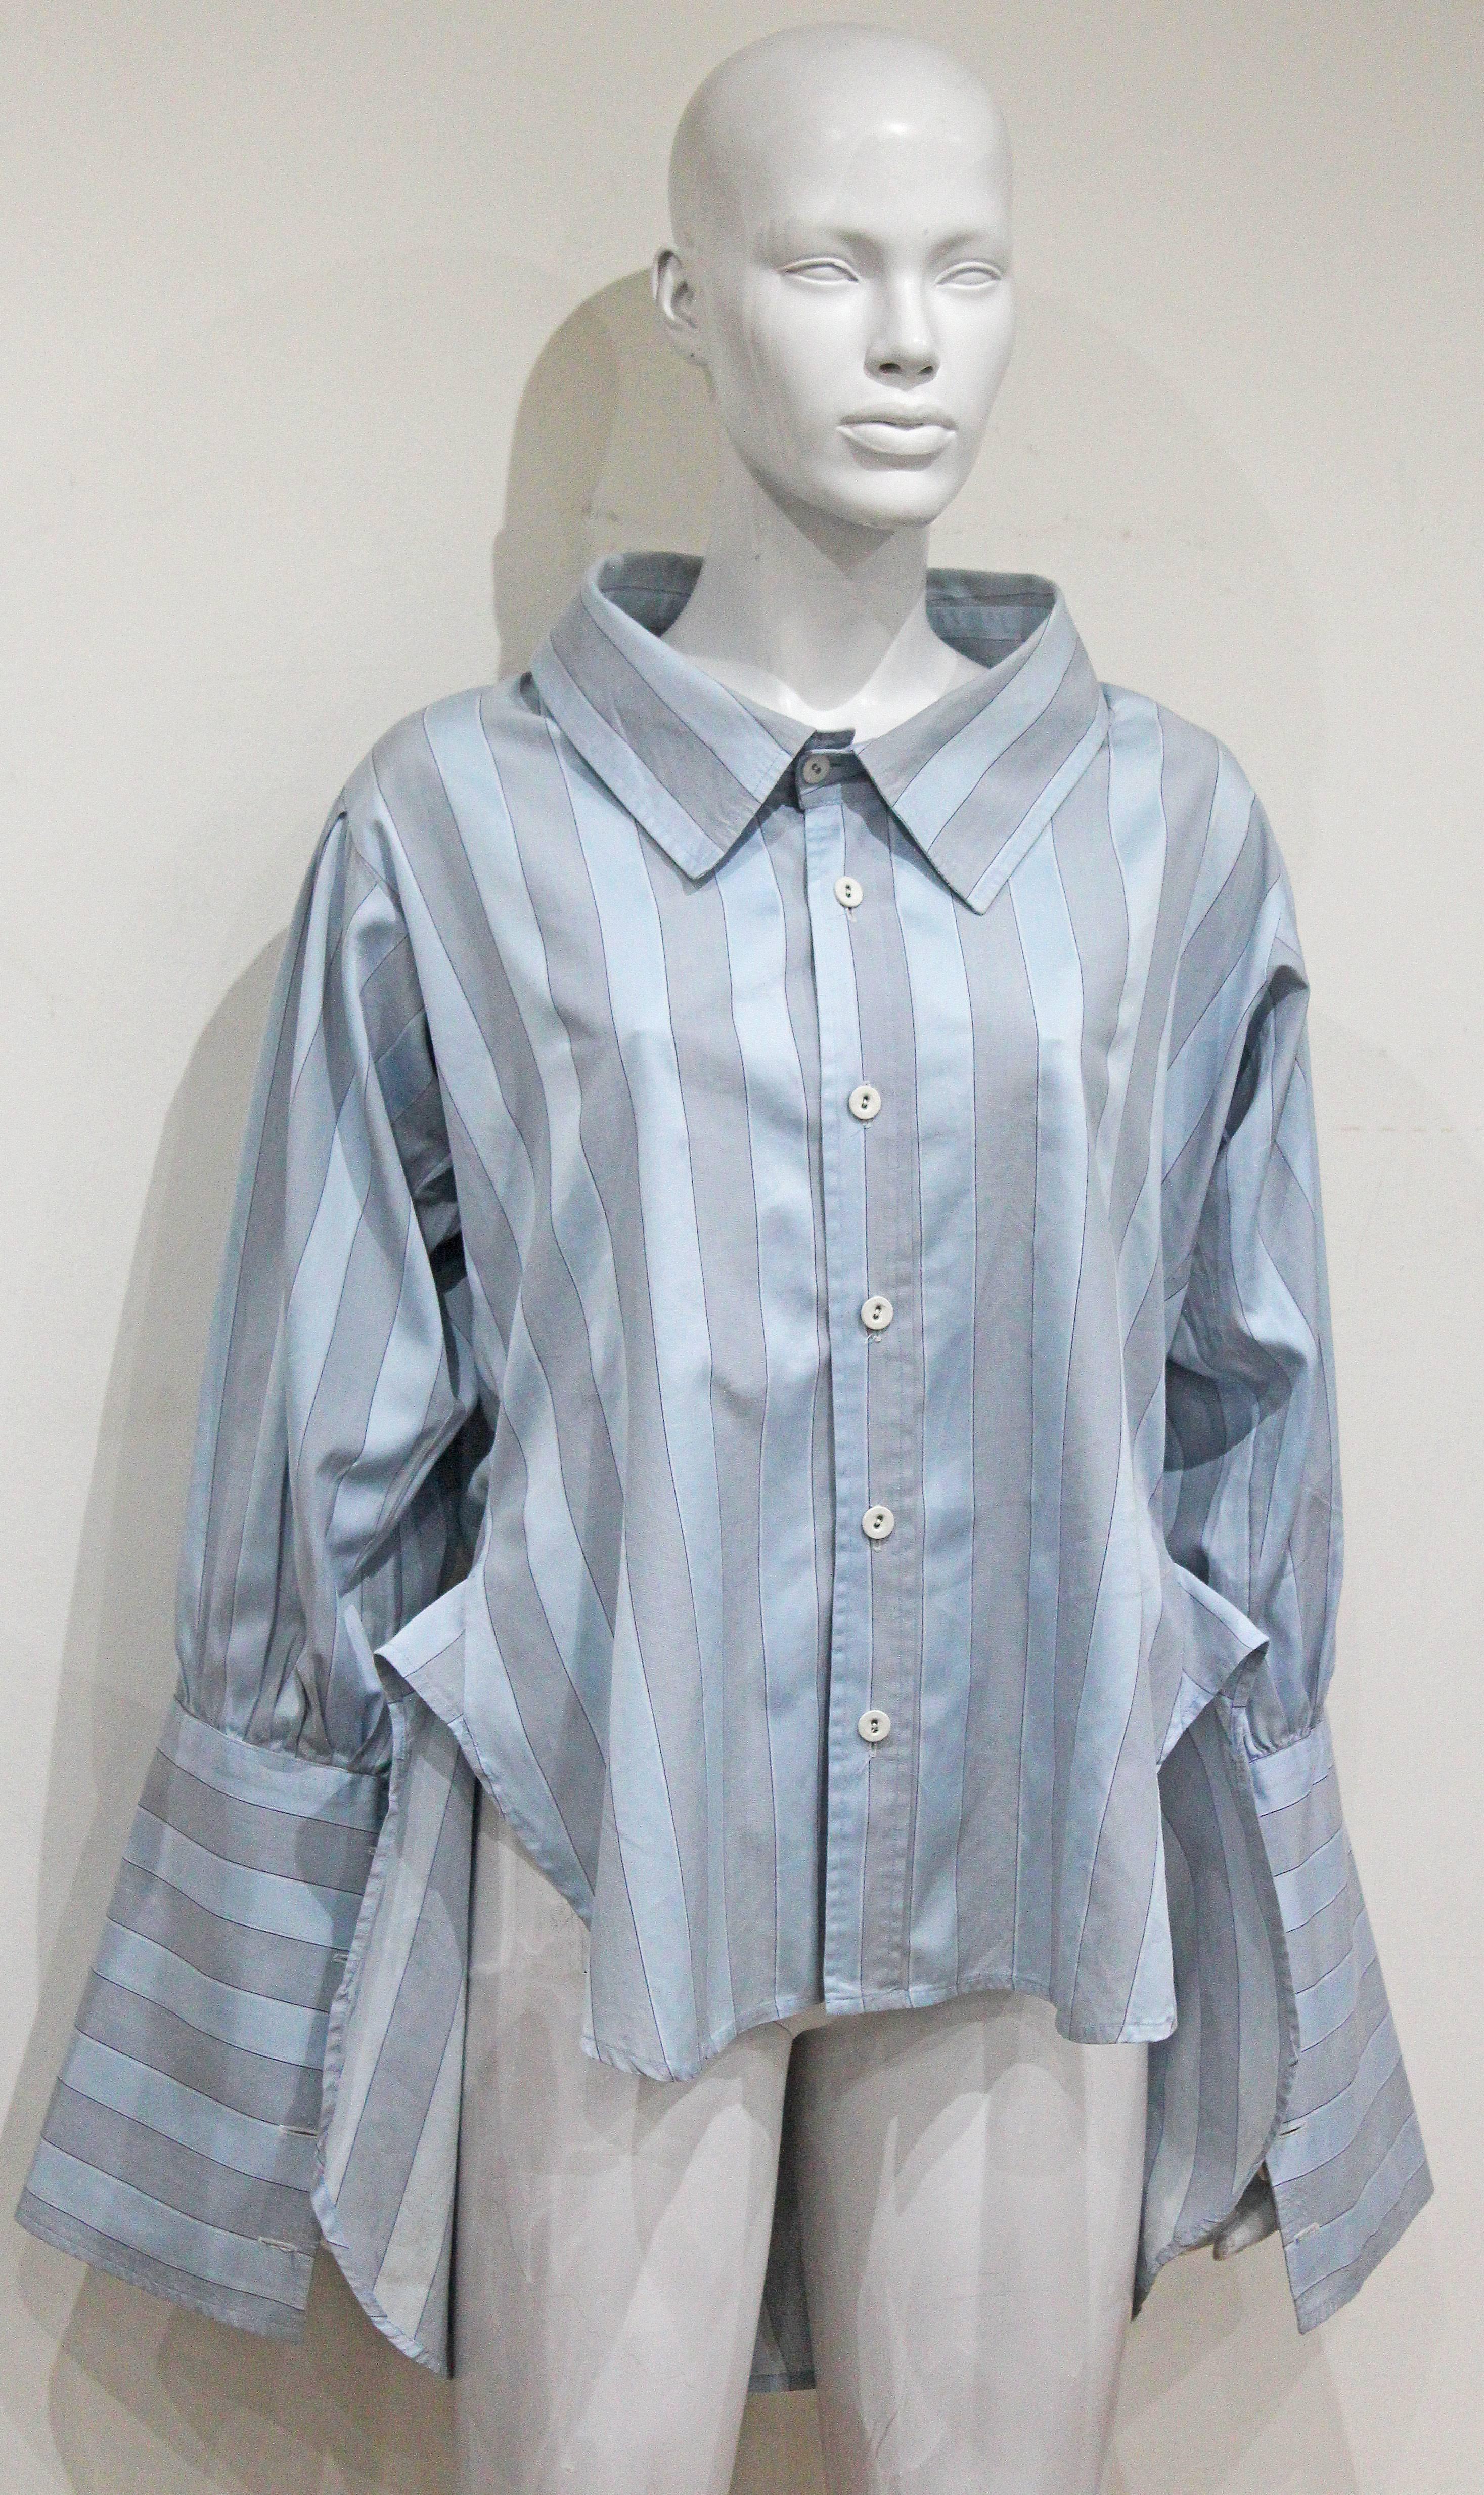 An oversized striped pirate shirt by Vivienne Westwood and Malcolm McLaren, circa 1981. The shirt has huge cuffs and has a long back and short front. 

S/M